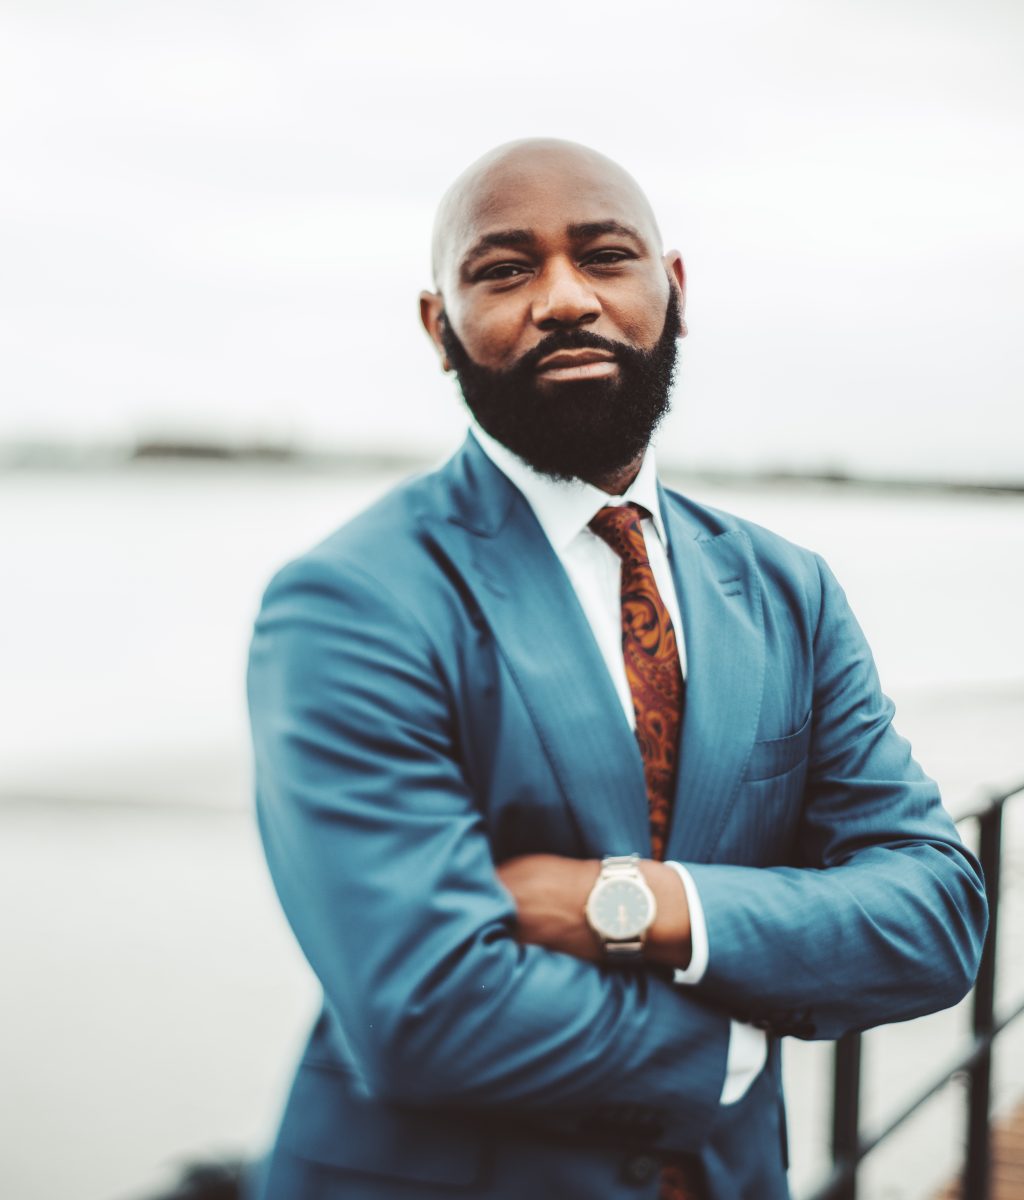 A true tilt-shift portrait of a successful adult African bald bearded man in a blue suit with tie and watch standing with hands crossed on an embankment near facing on an overcast day, selective focus